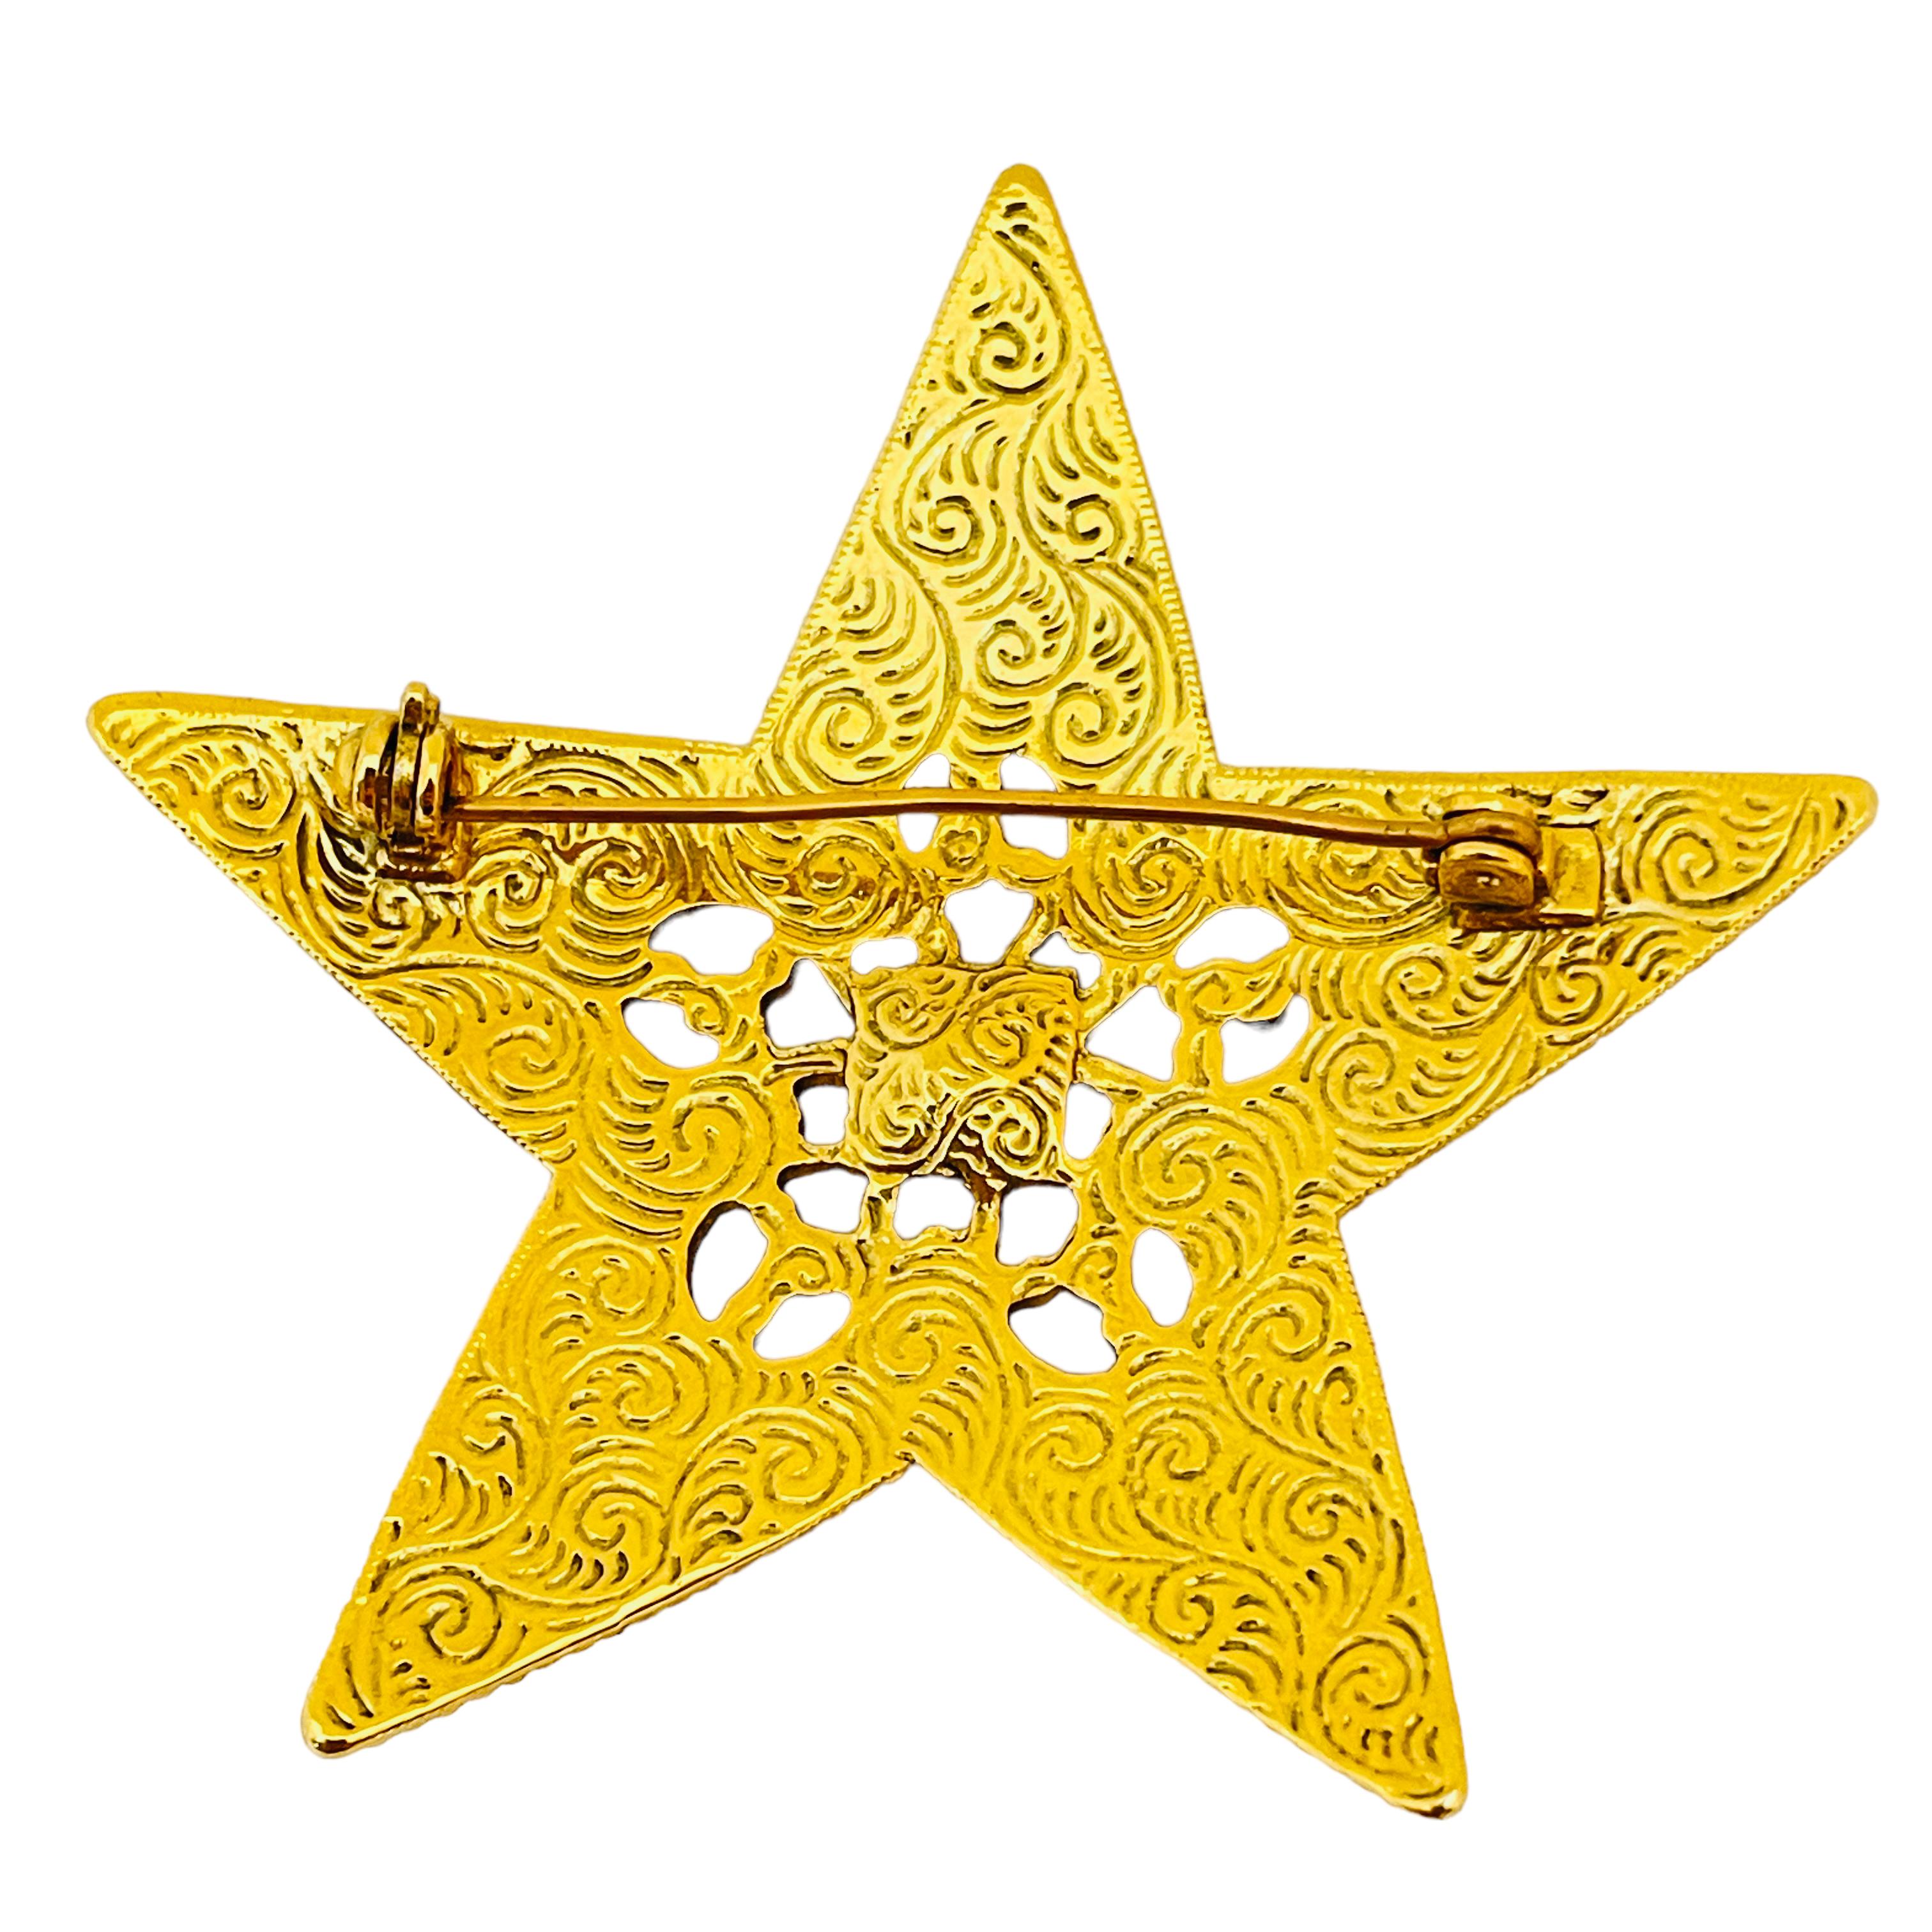 Vintage gold rhinestone star designer runway brooch  In Excellent Condition For Sale In Palos Hills, IL